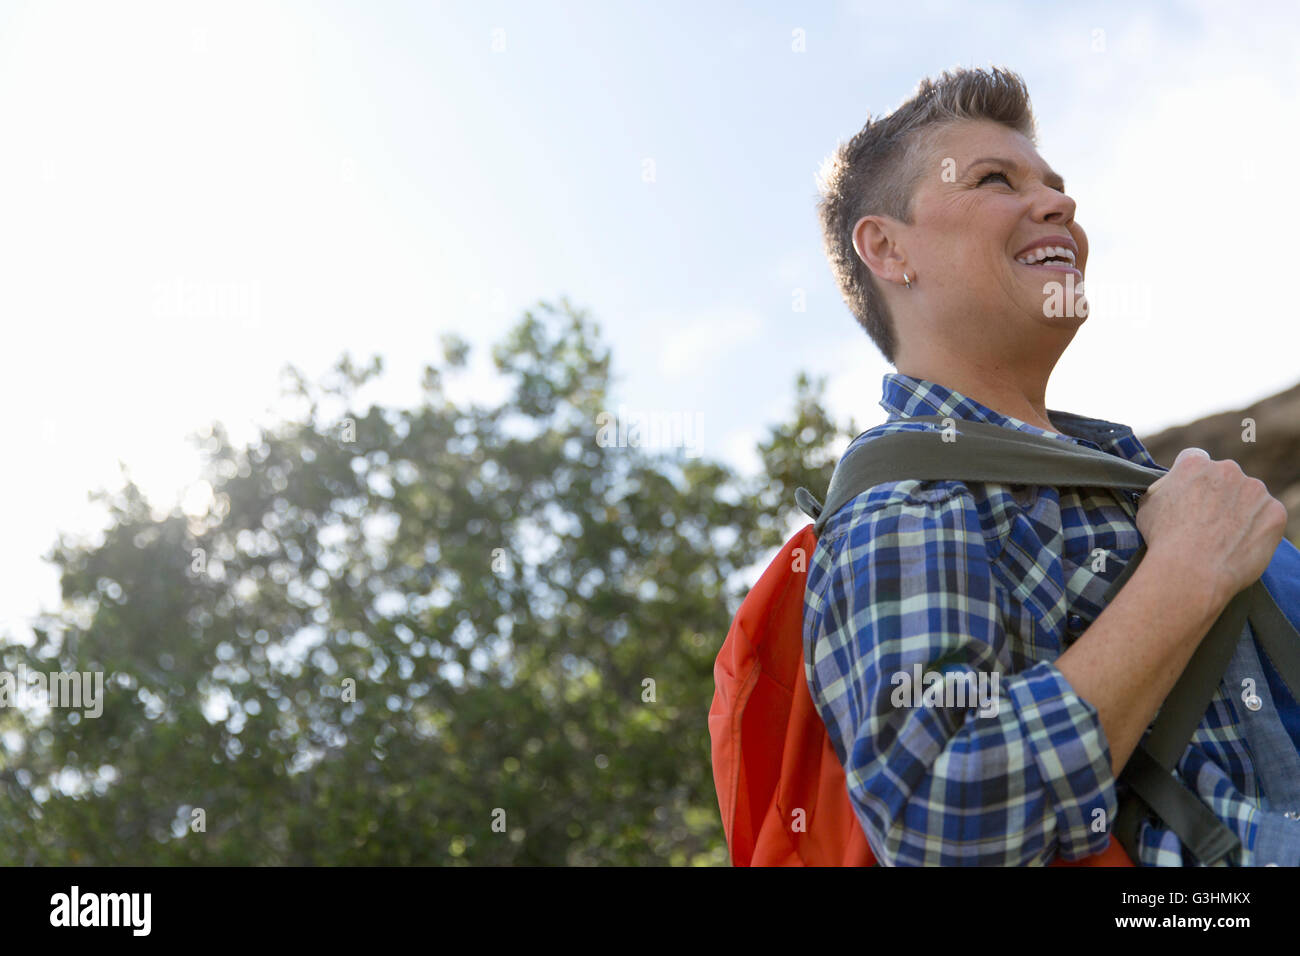 Woman carrying backpack looking away smiling Stock Photo